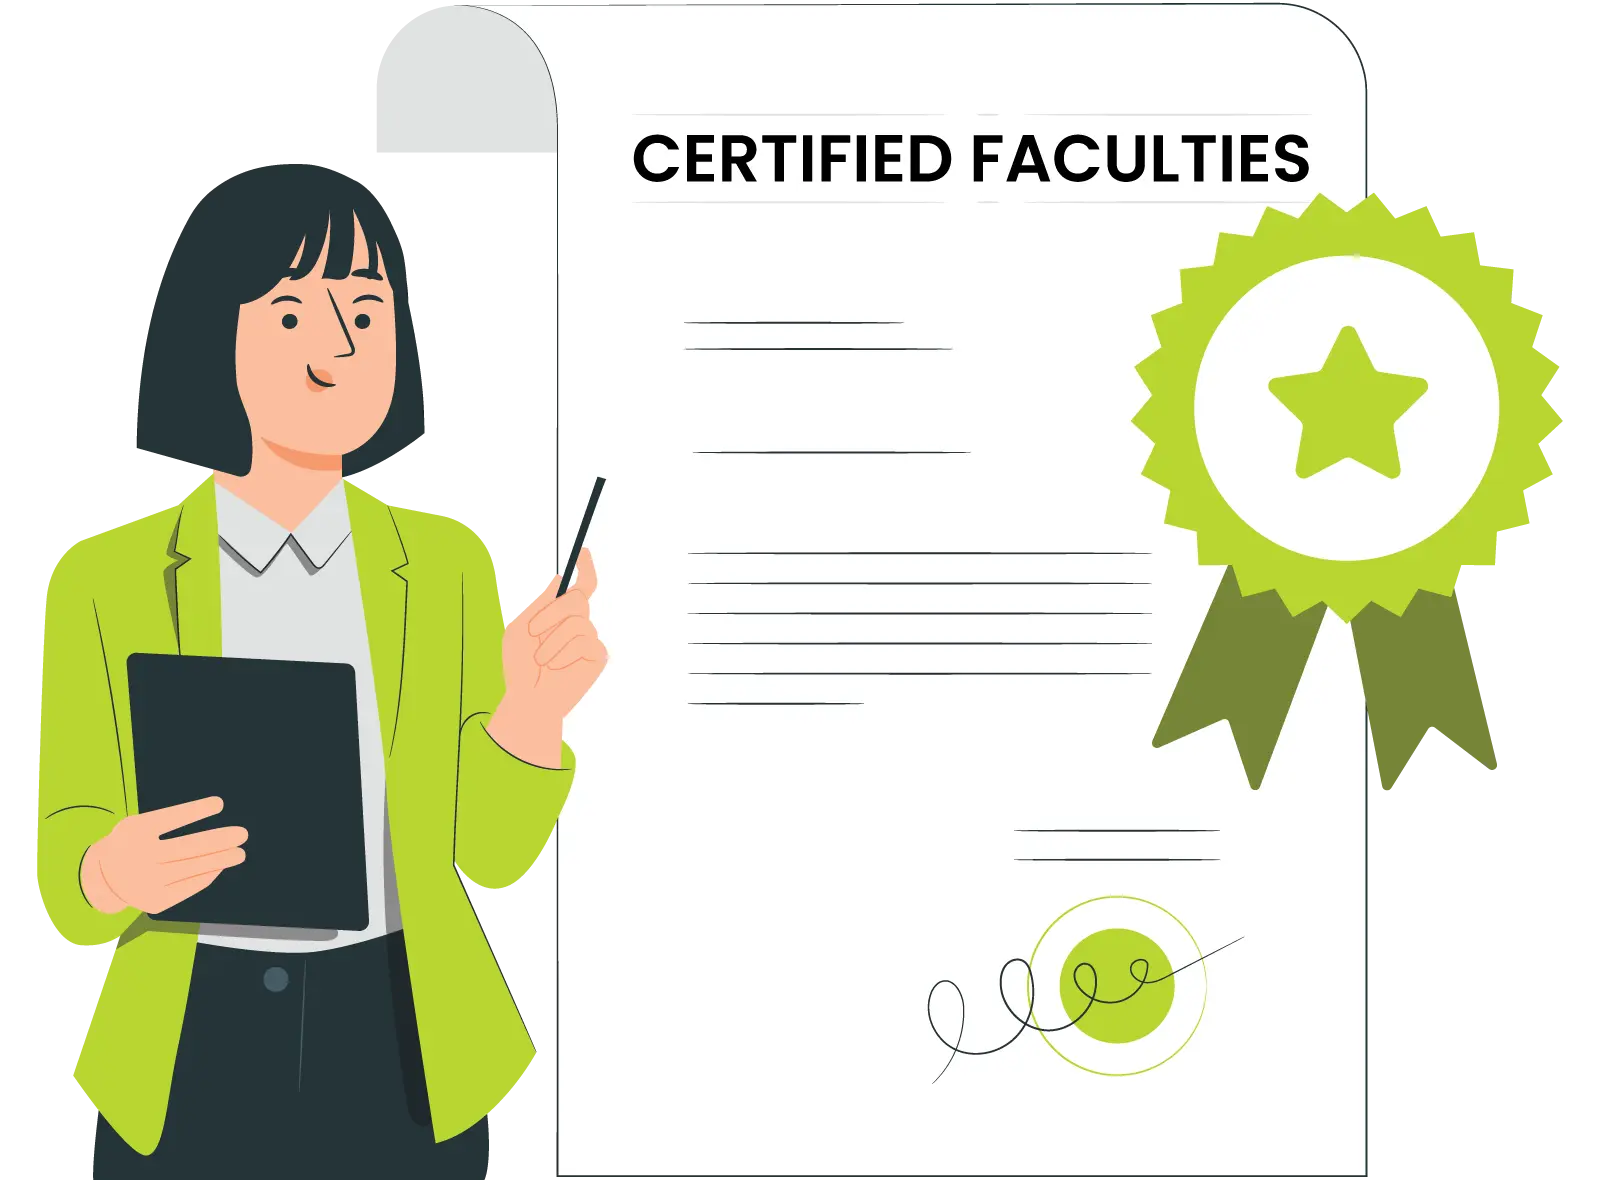 WELL EXPERIENCED CERTIFIED FACULTIES